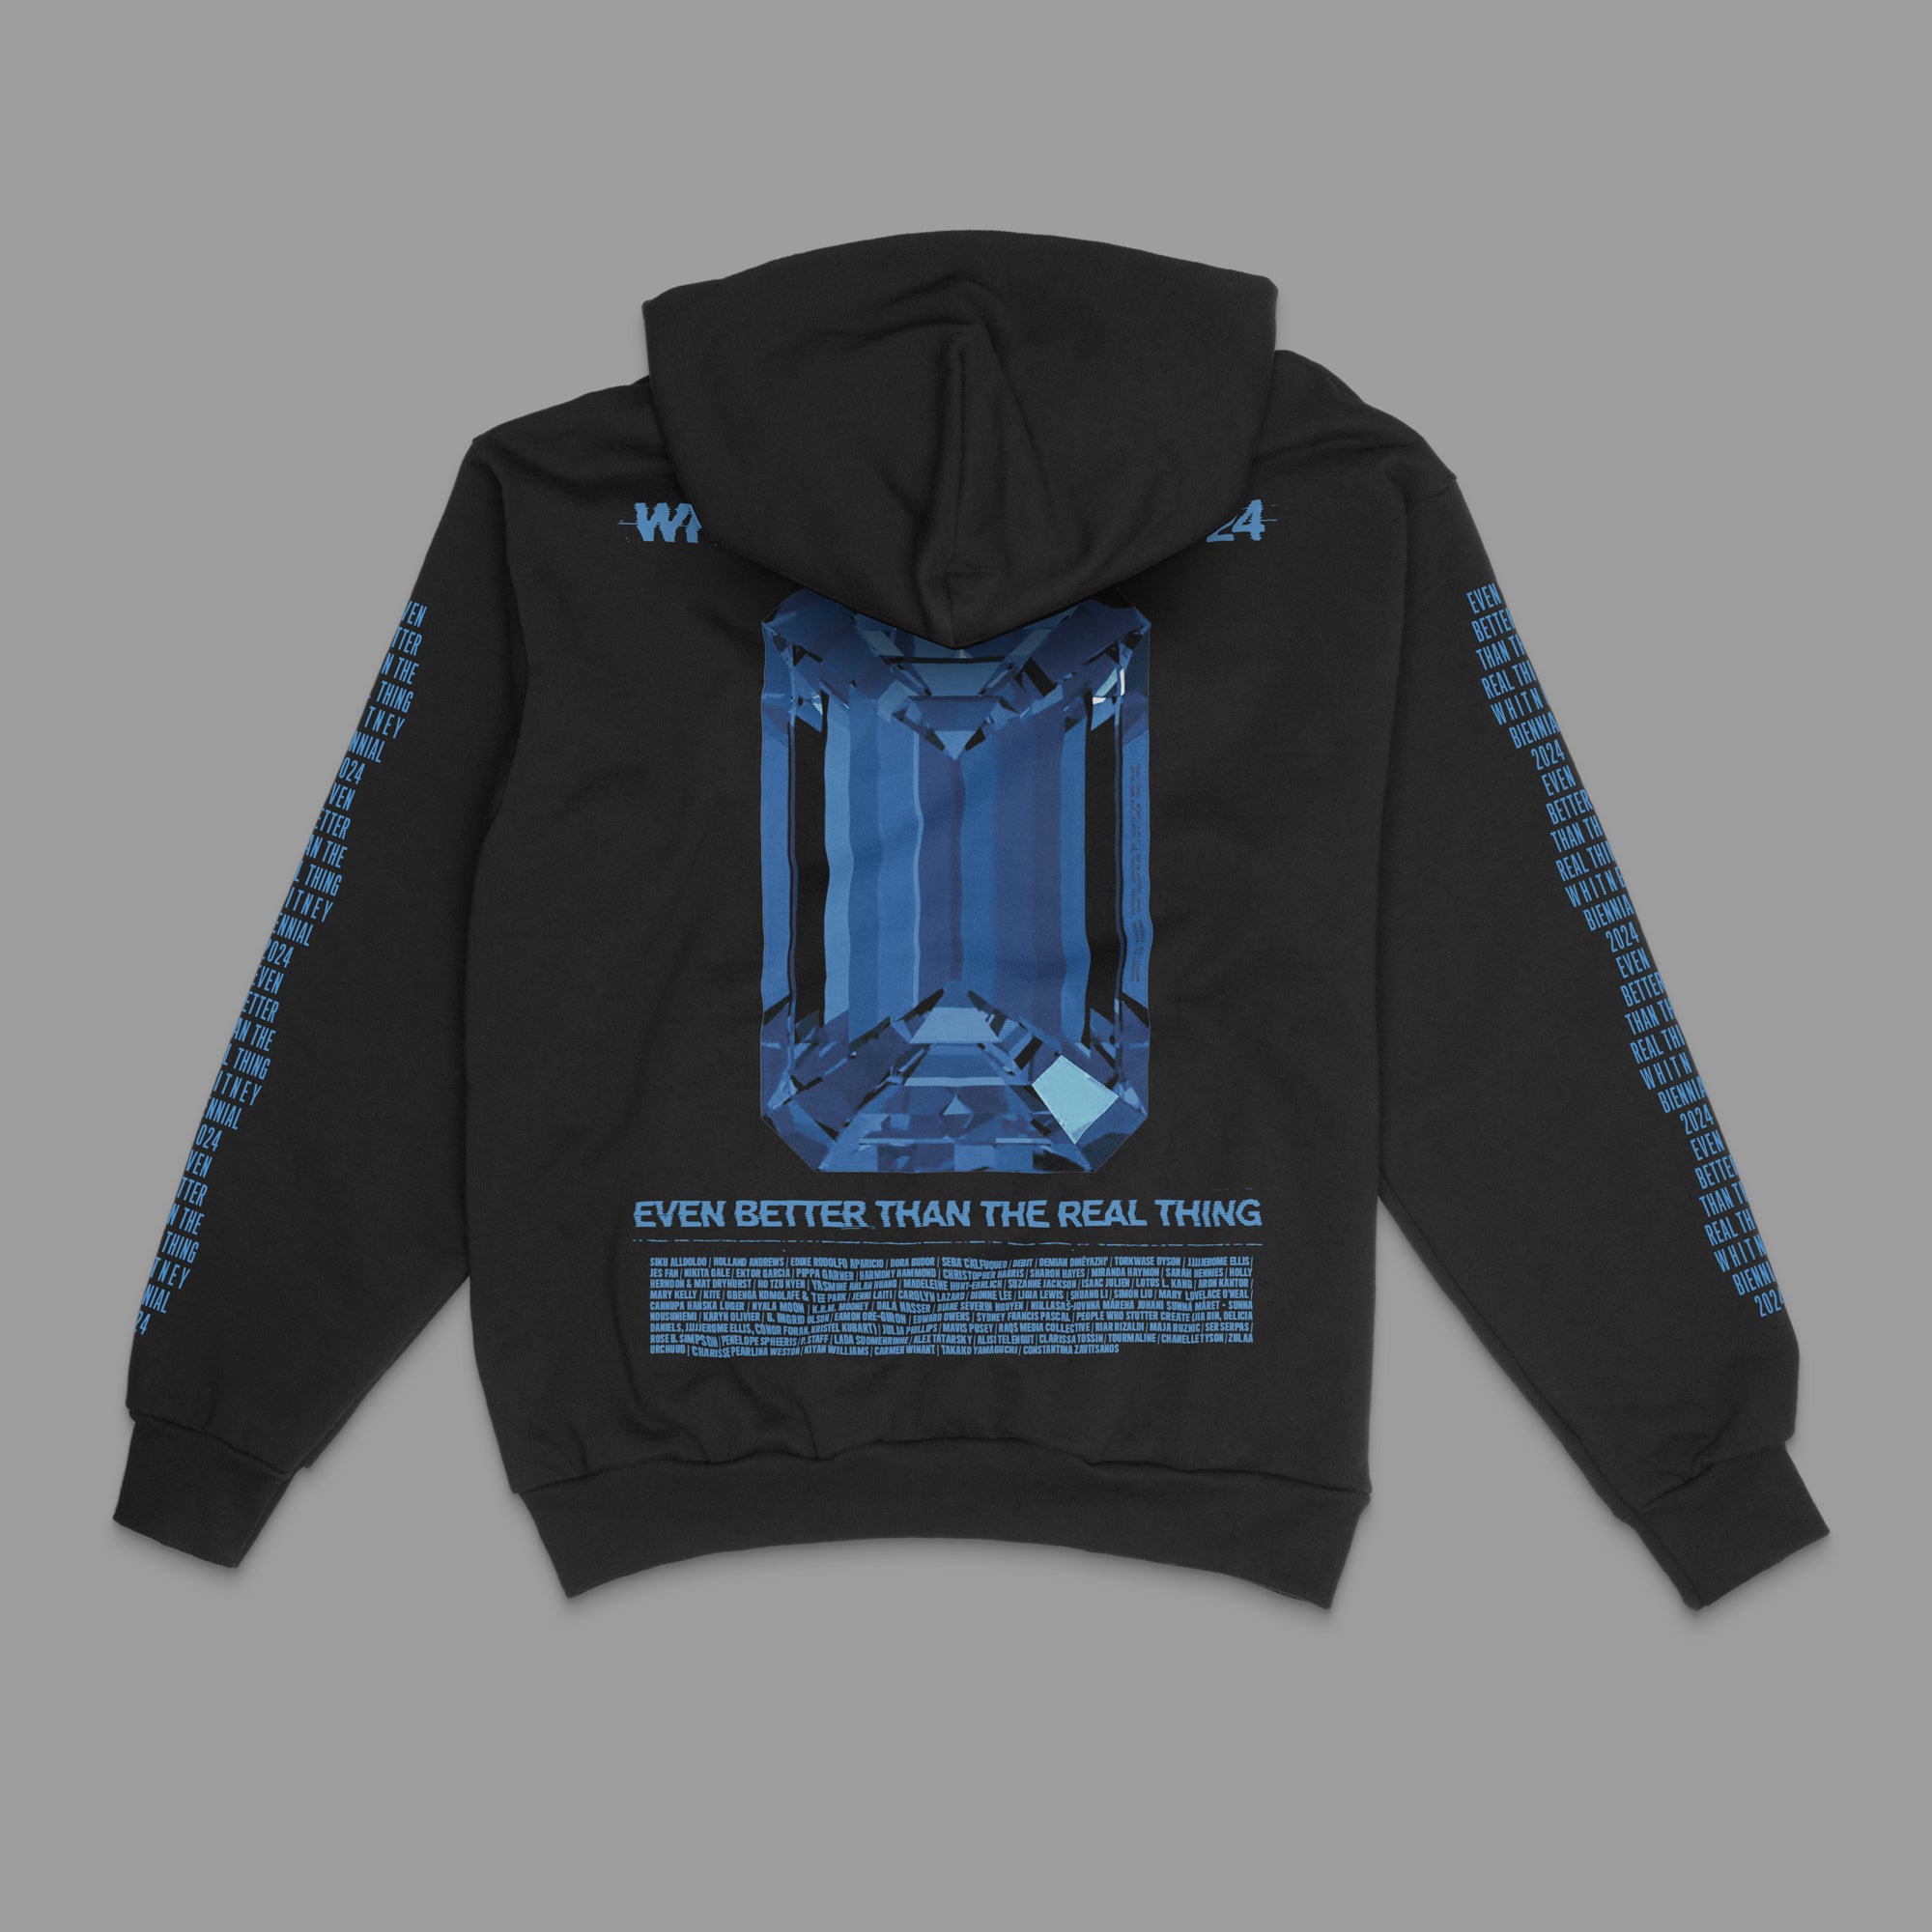 100% cotton black heavyweight fleece hoodie featuring blue graphics and text on the Whitney Biennial 2024: Even Better Than The Real Thing